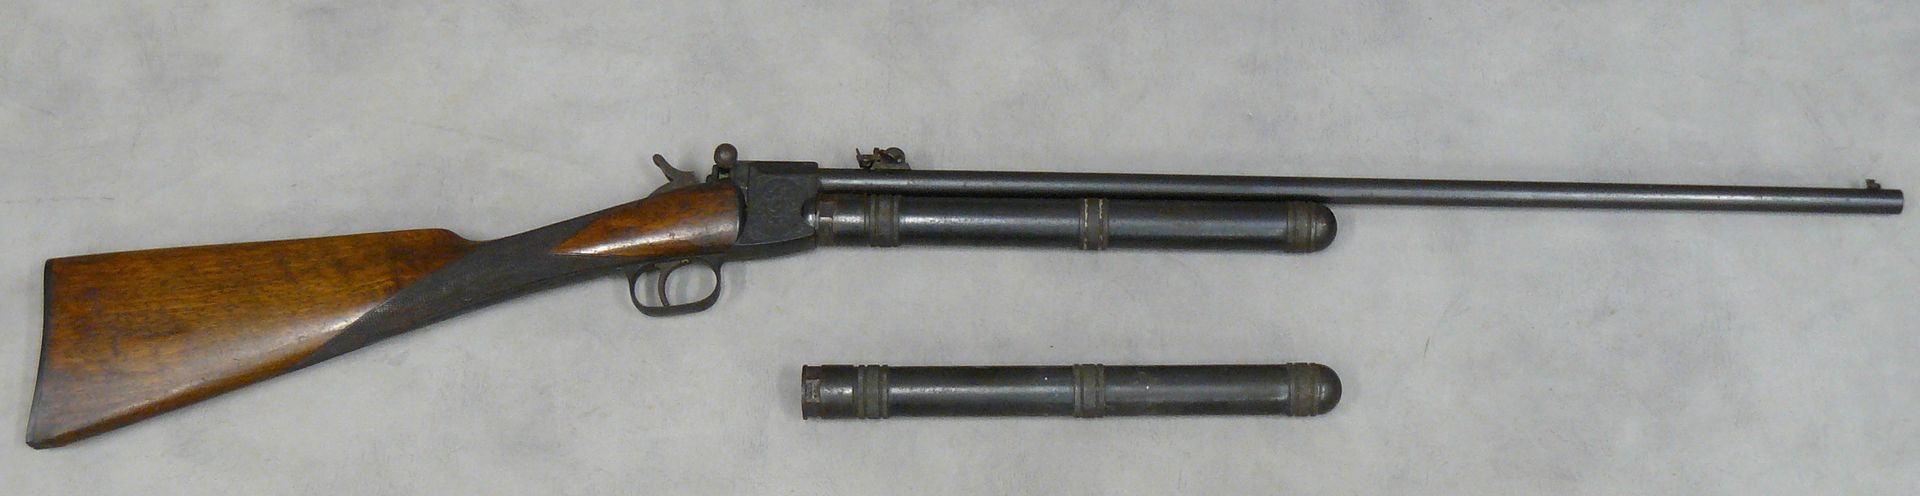 Null a Giffard liquefied gas rifle, caliber 8mm (with two tubes), finely engrave&hellip;